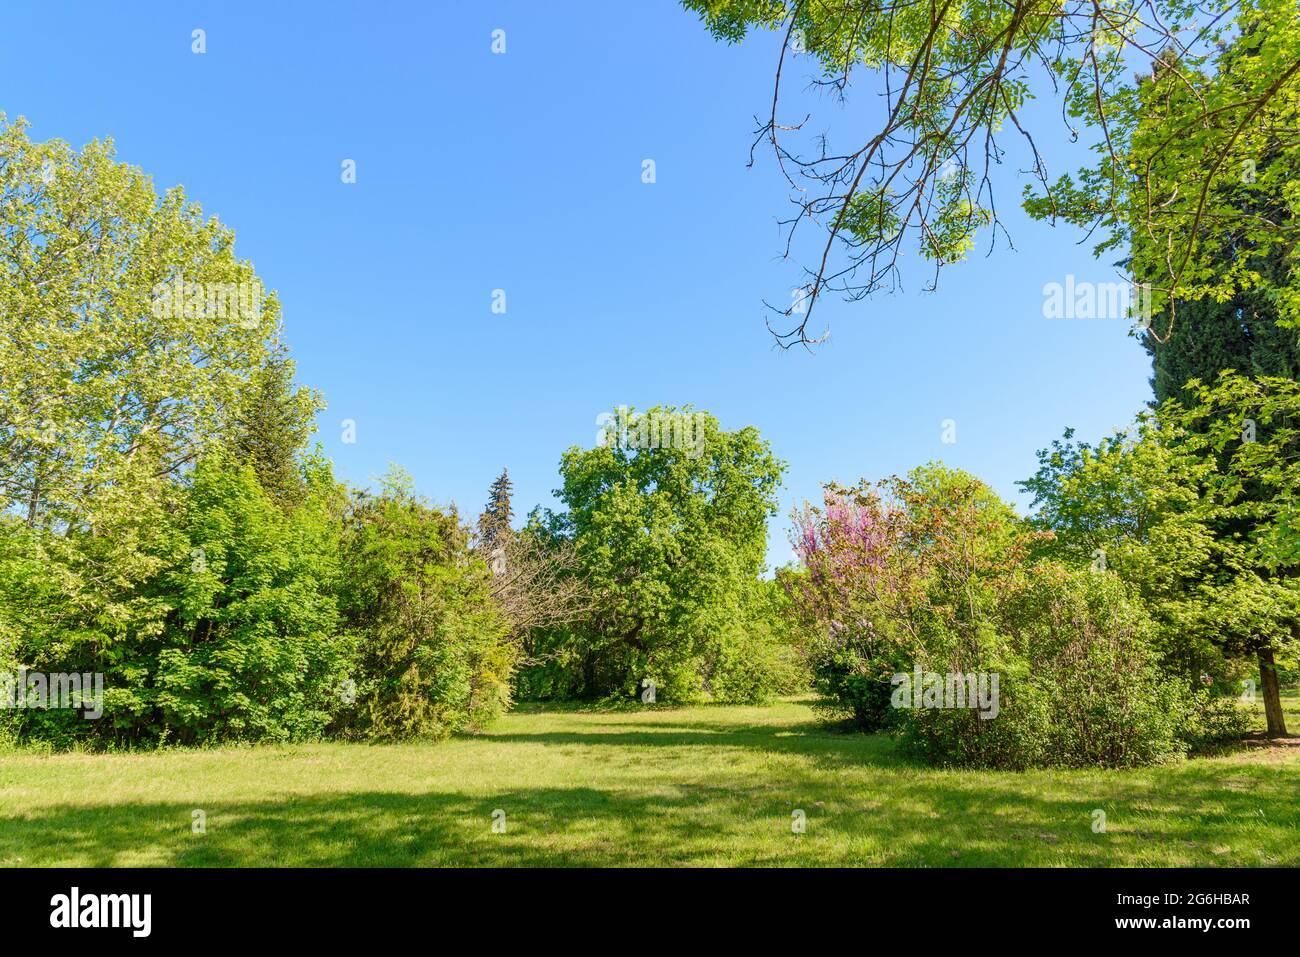 backyard and garden with manu trees and grass on lawn Stock Photo